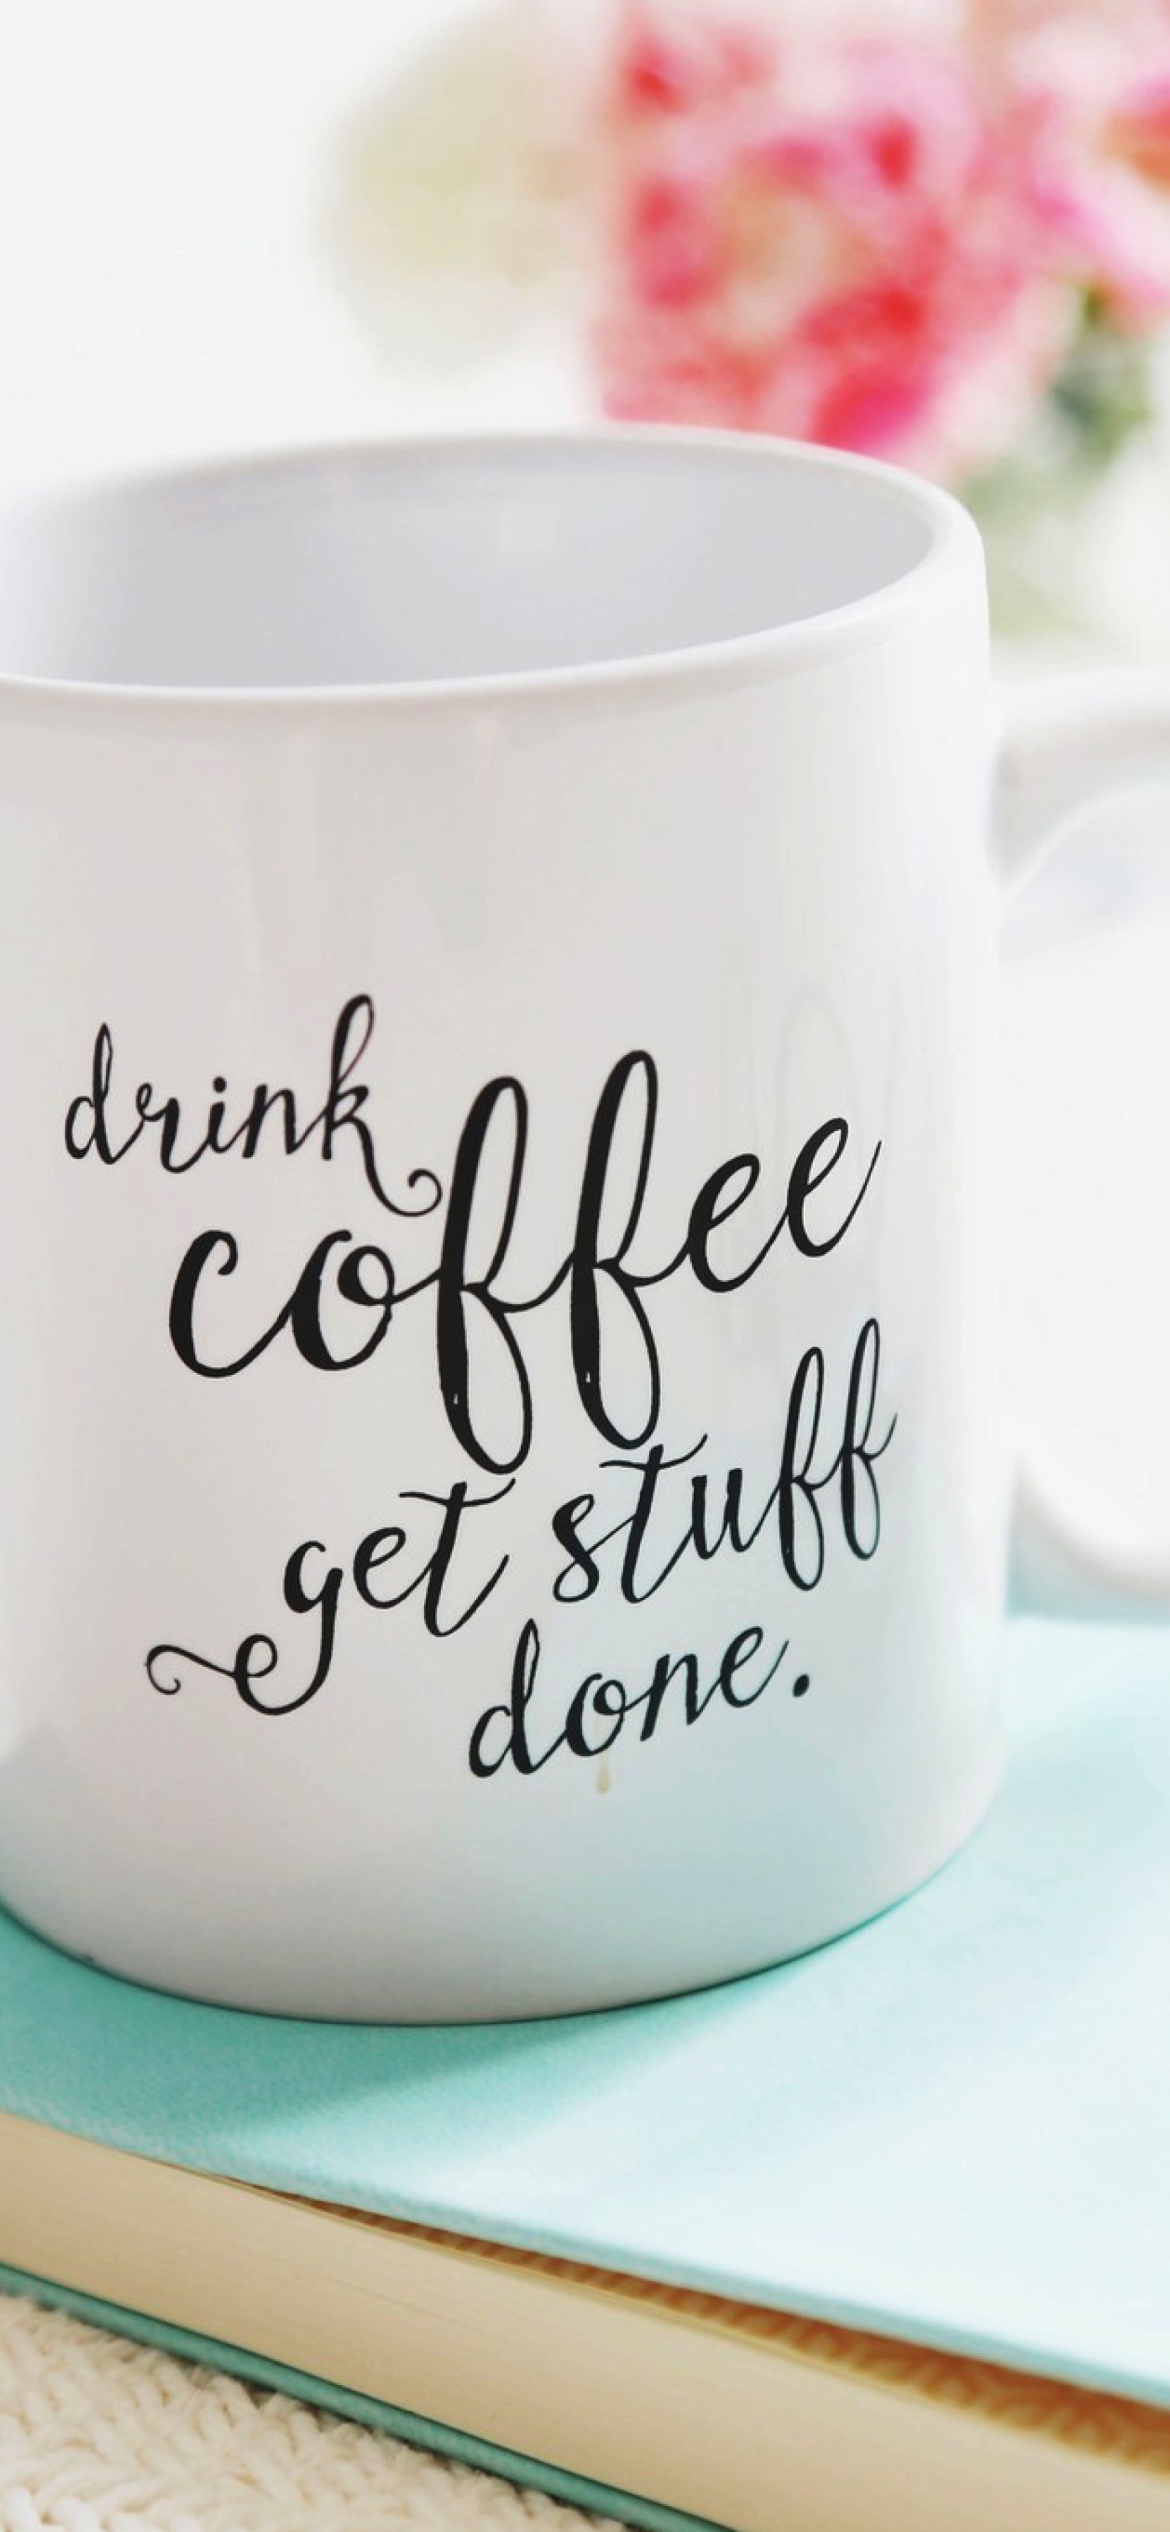 Drink Coffee Quote wallpaper 1170x2532